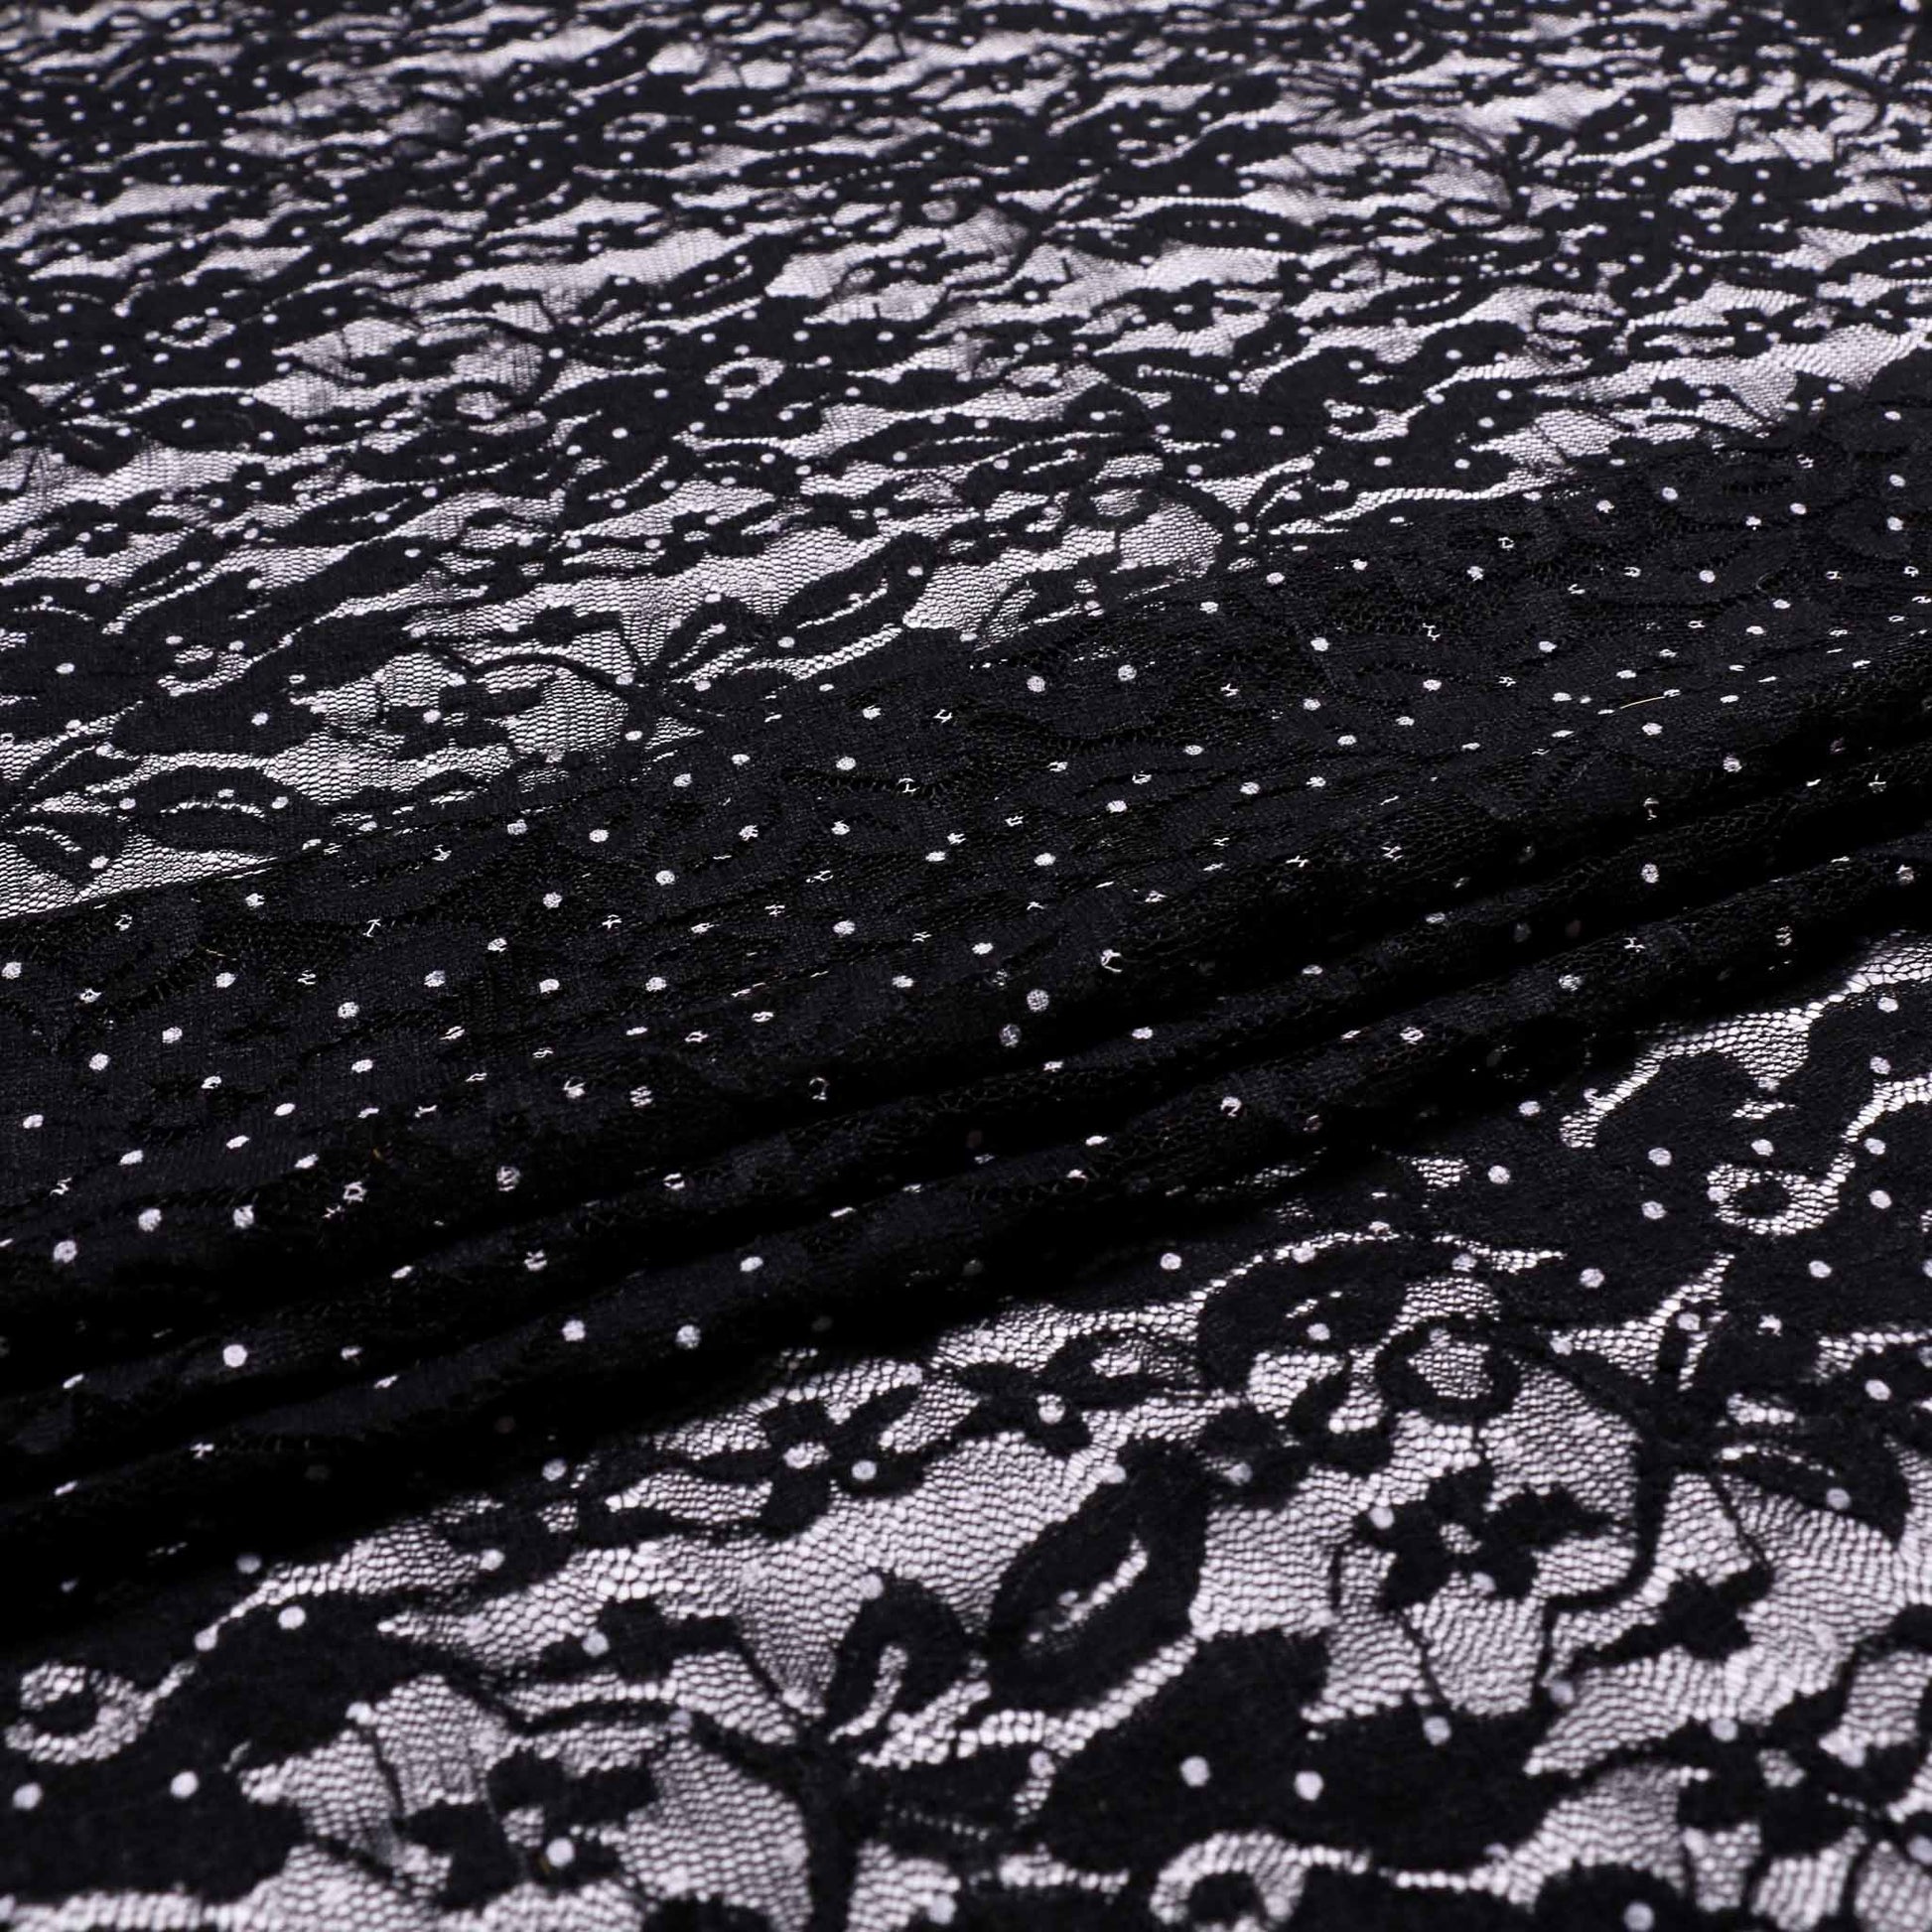 white polka dots on floral black lace stretchy dressmaking fabric